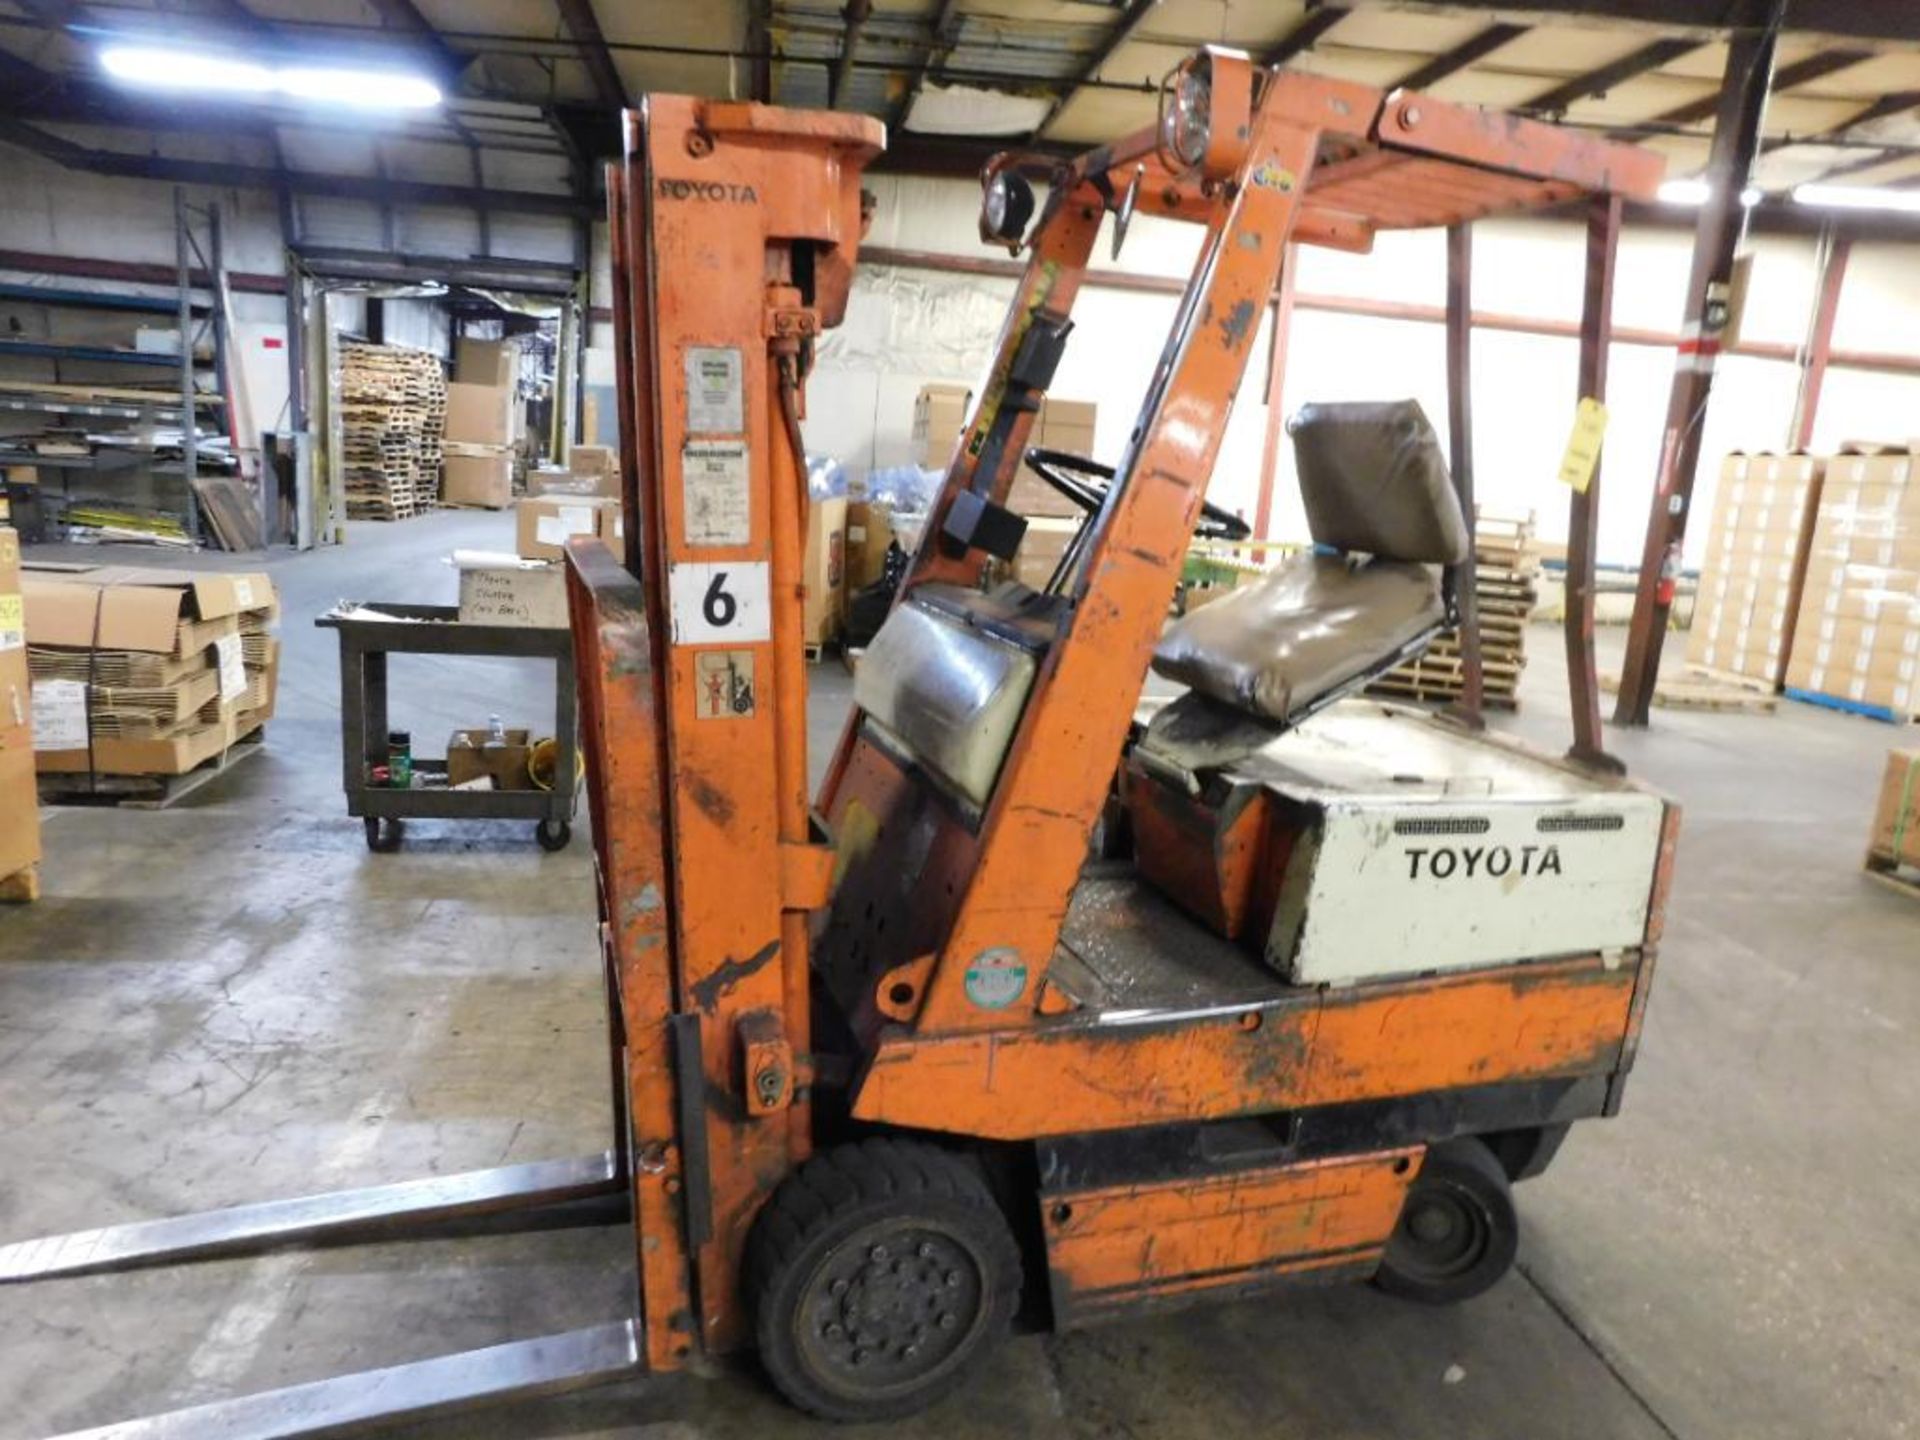 Toyota 2640 lb. Electric Forklift Model 2FBCA15, S/N 13236 (1989), Solid Tires, Overhead Guard,